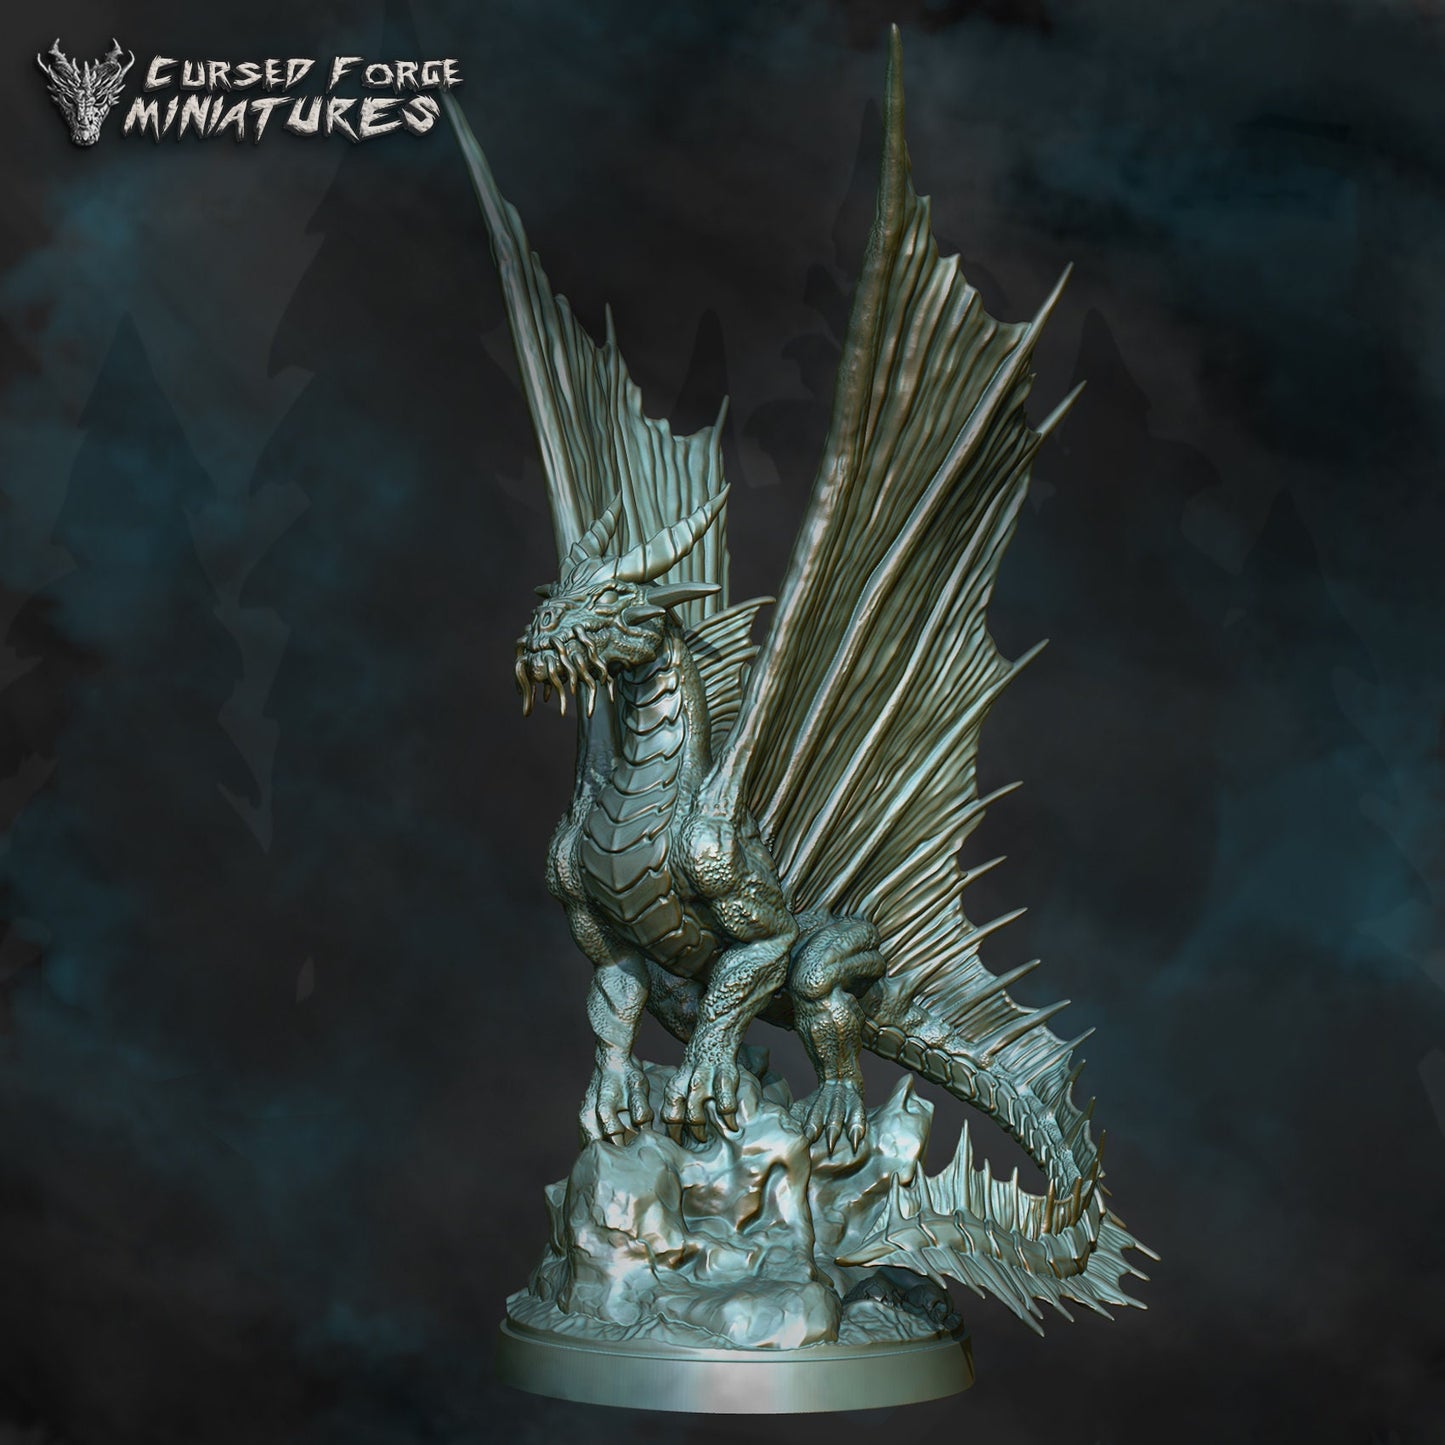 Adult Gold Dragon D&D Miniature, by Cursed Forge Miniatures // 3D Print on Demand / DnD / Pathfinder / RPG